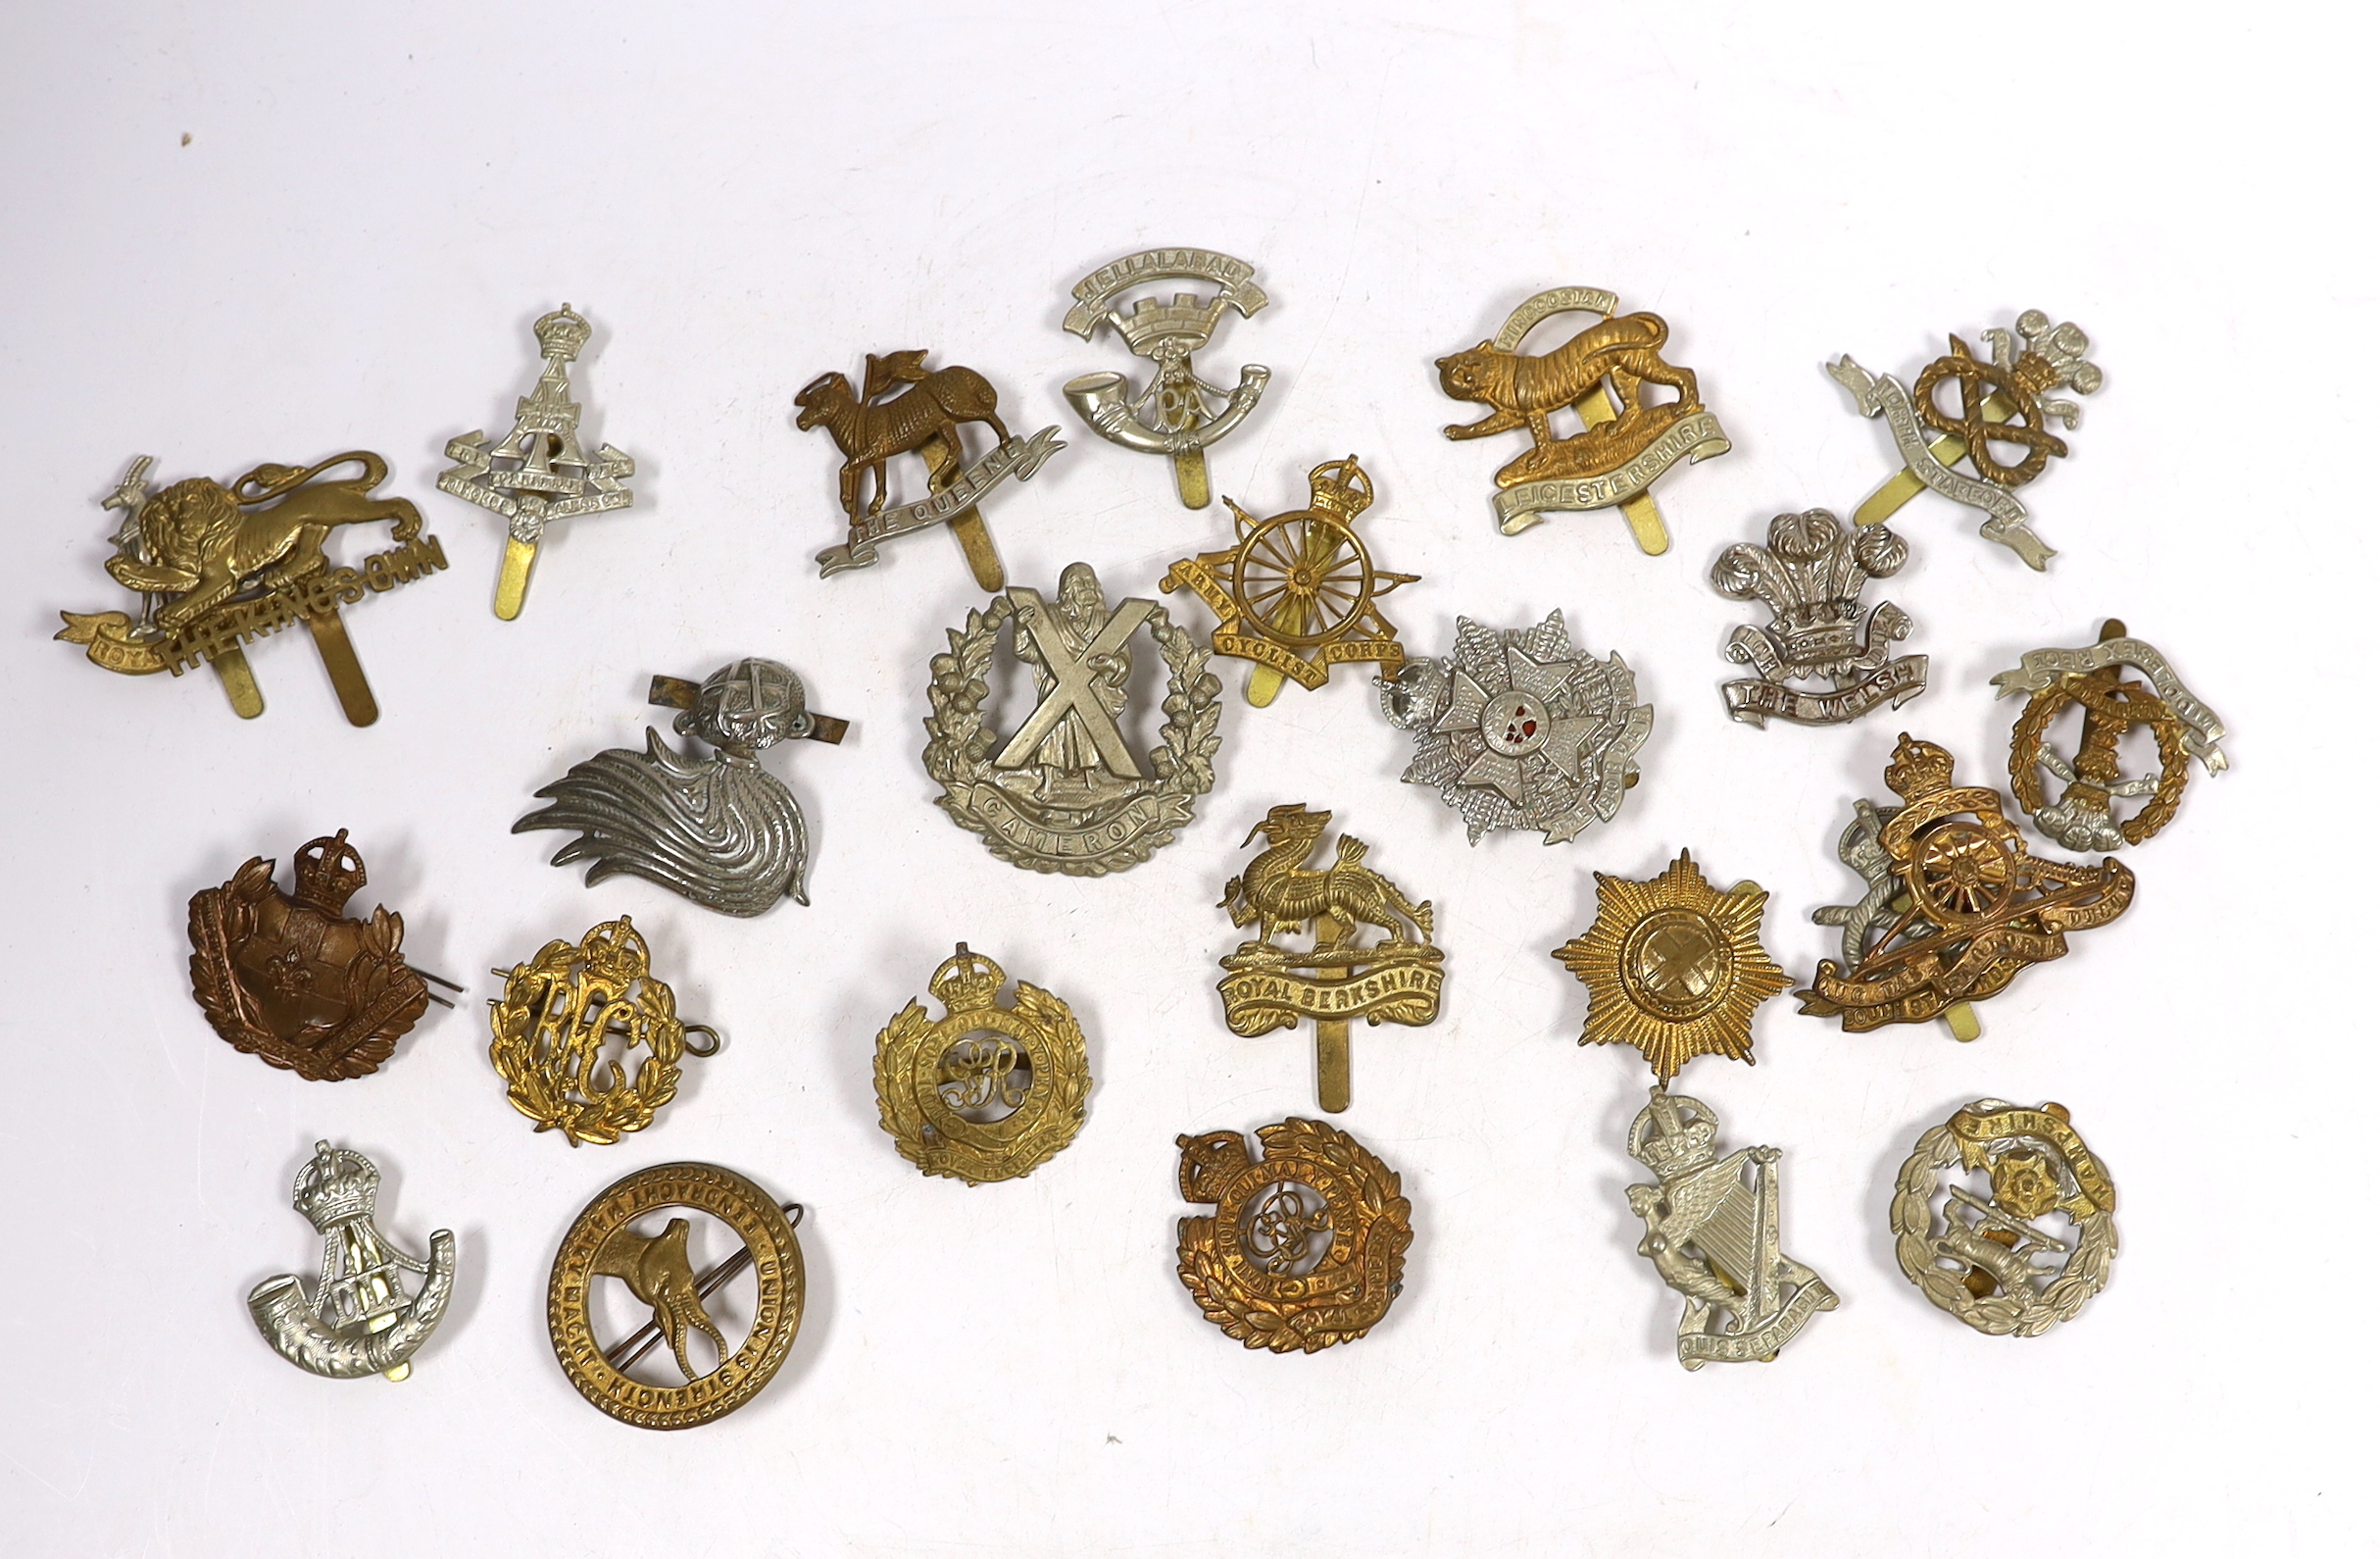 Twenty-five military cap badges including Royal Engineers, The Kings Own, Royal Warwickshire, North Stafford, Royal Berkshire, The Border Regiment, Army Cyclist Corps, South Staffordshire, Middlesex, Cameron, Hampshire,